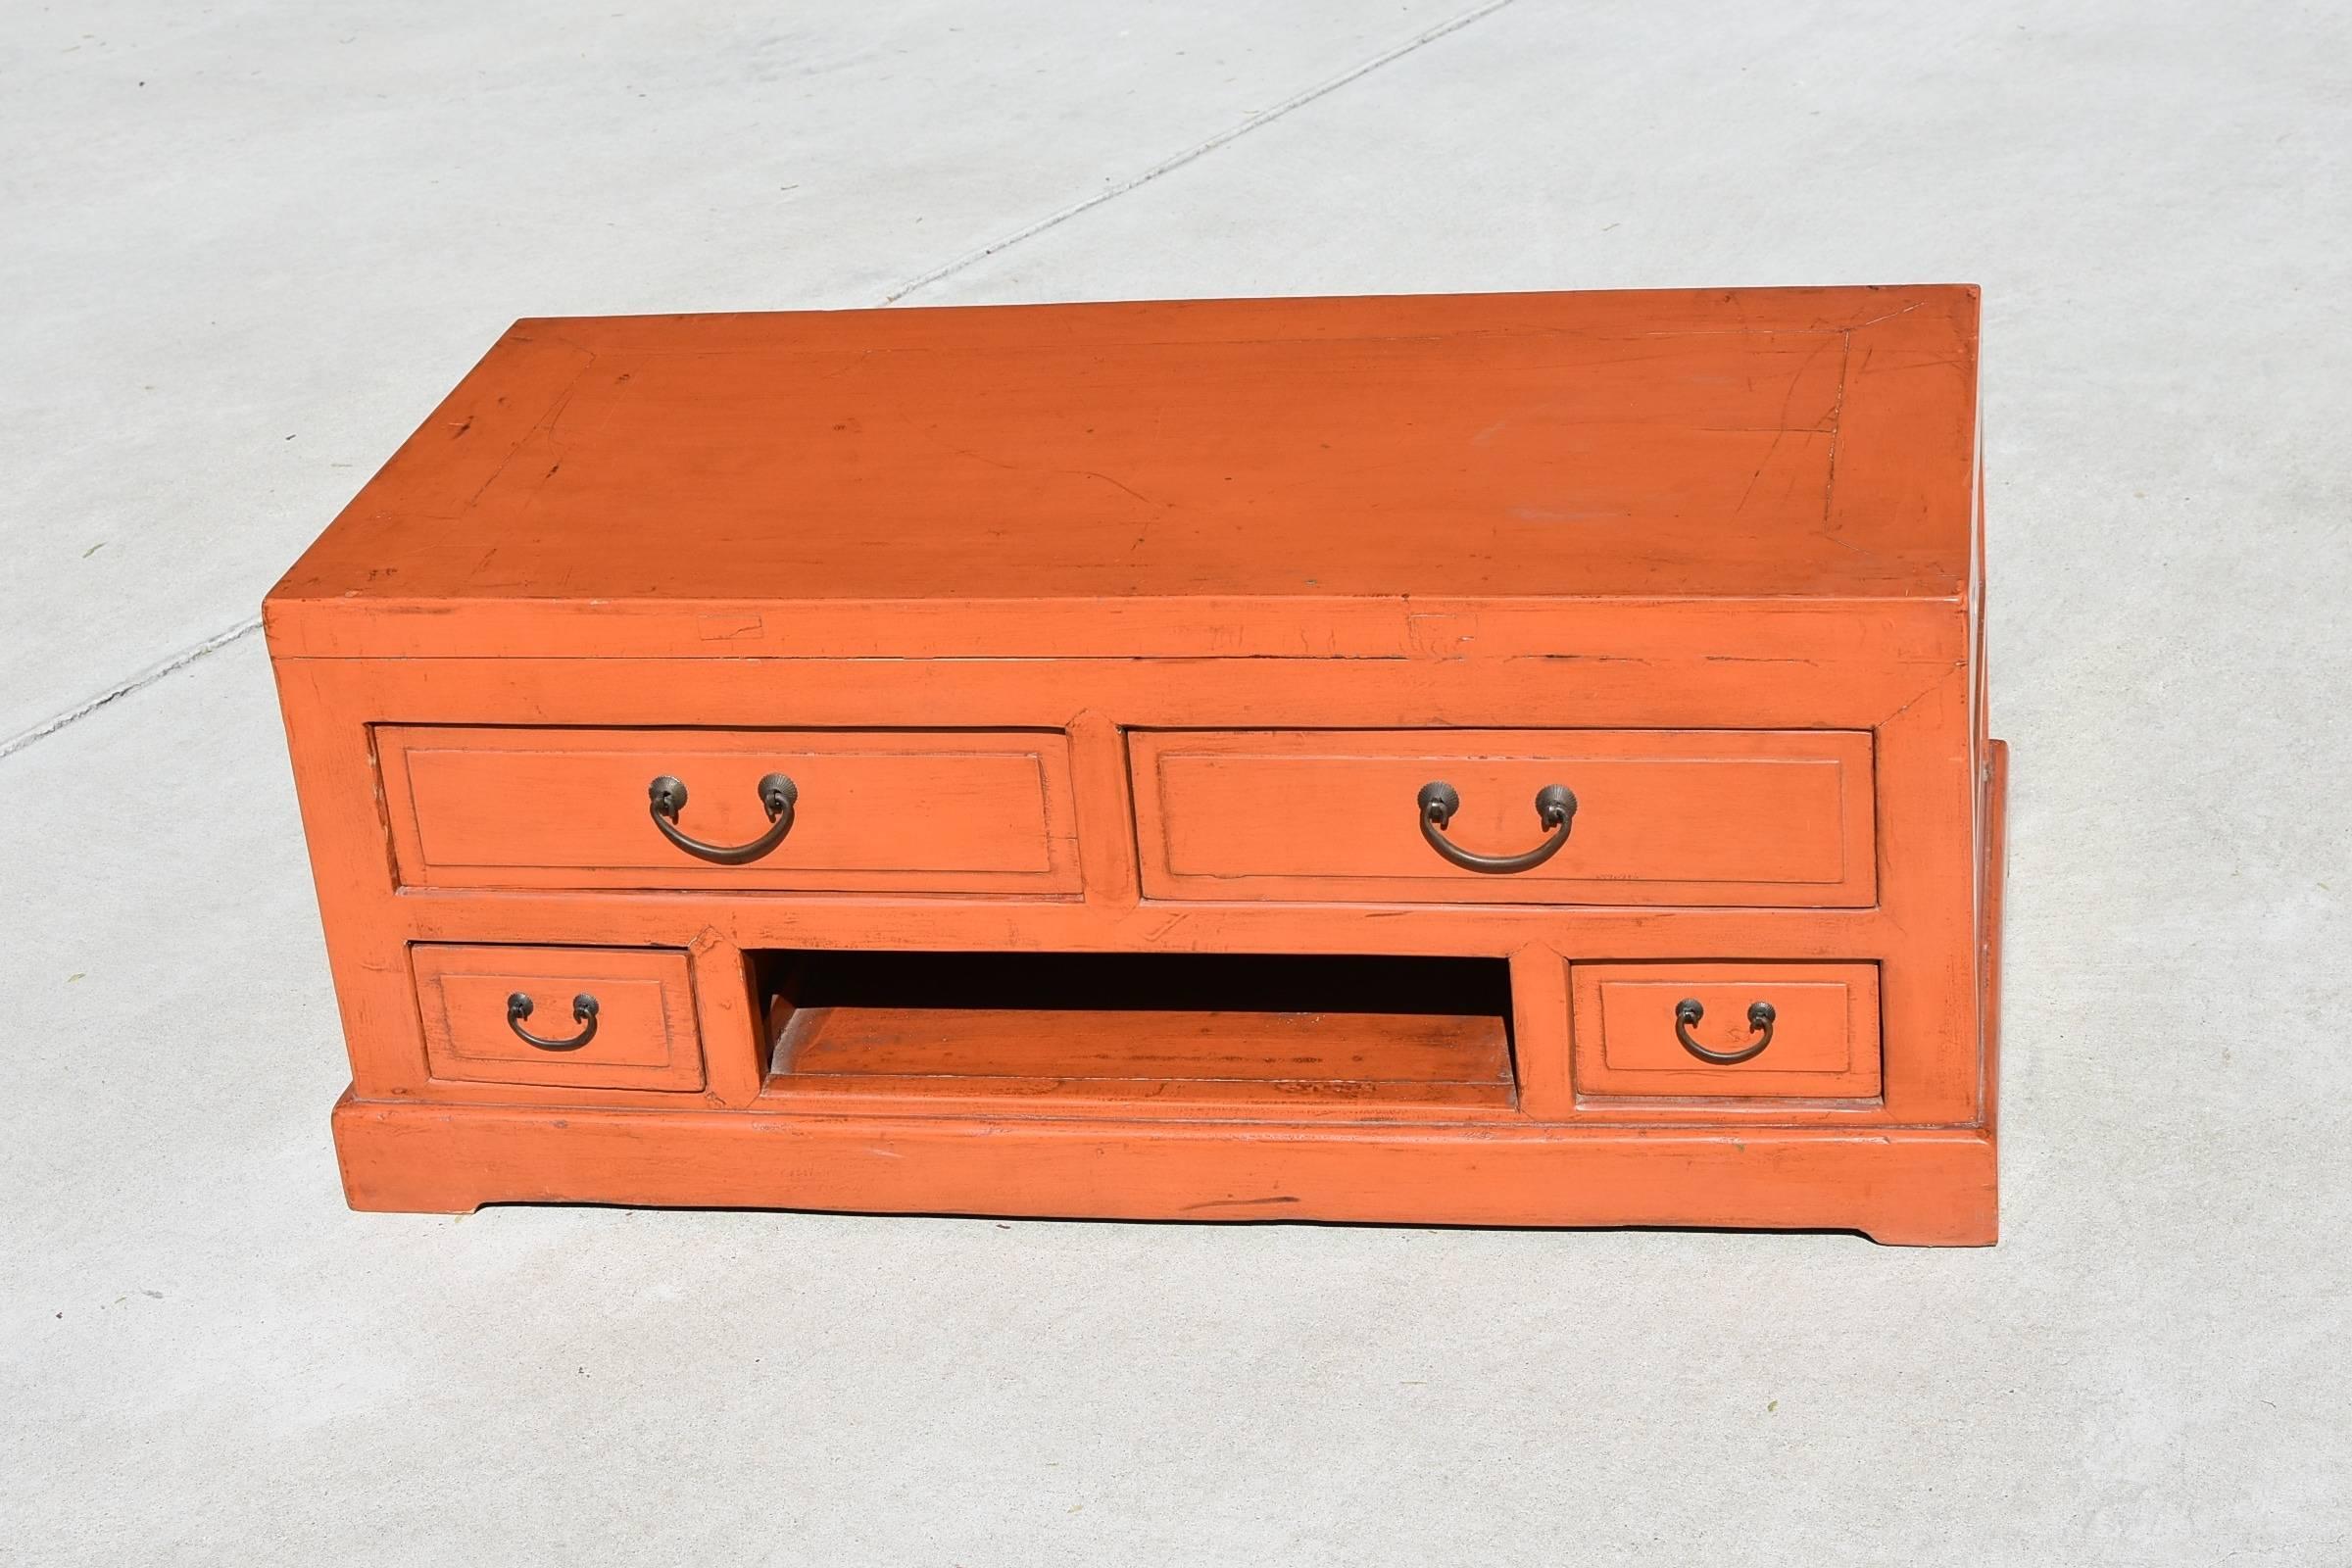 A special low table/chest that is lacquered in the unique color of orange. The solid wood piece has 4 full length drawers and an open space. It makes a great TV stand with cable box tucked away in the opening. The chest is finished all around making